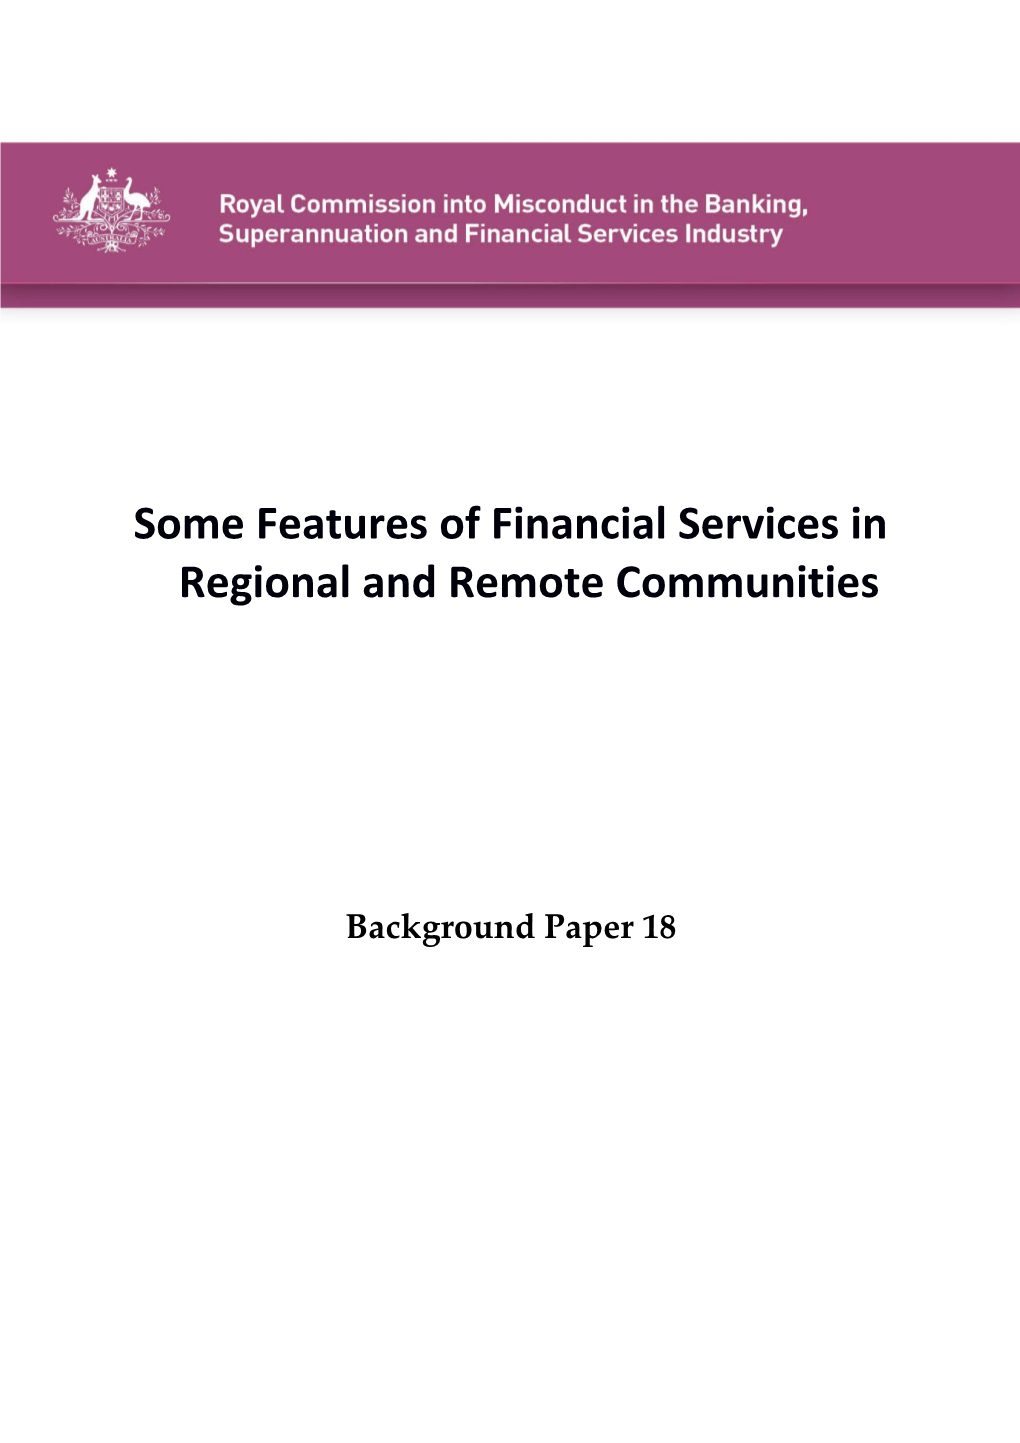 Background Paper 18 - Some Features of Financial Services in Regional and Remote Communities